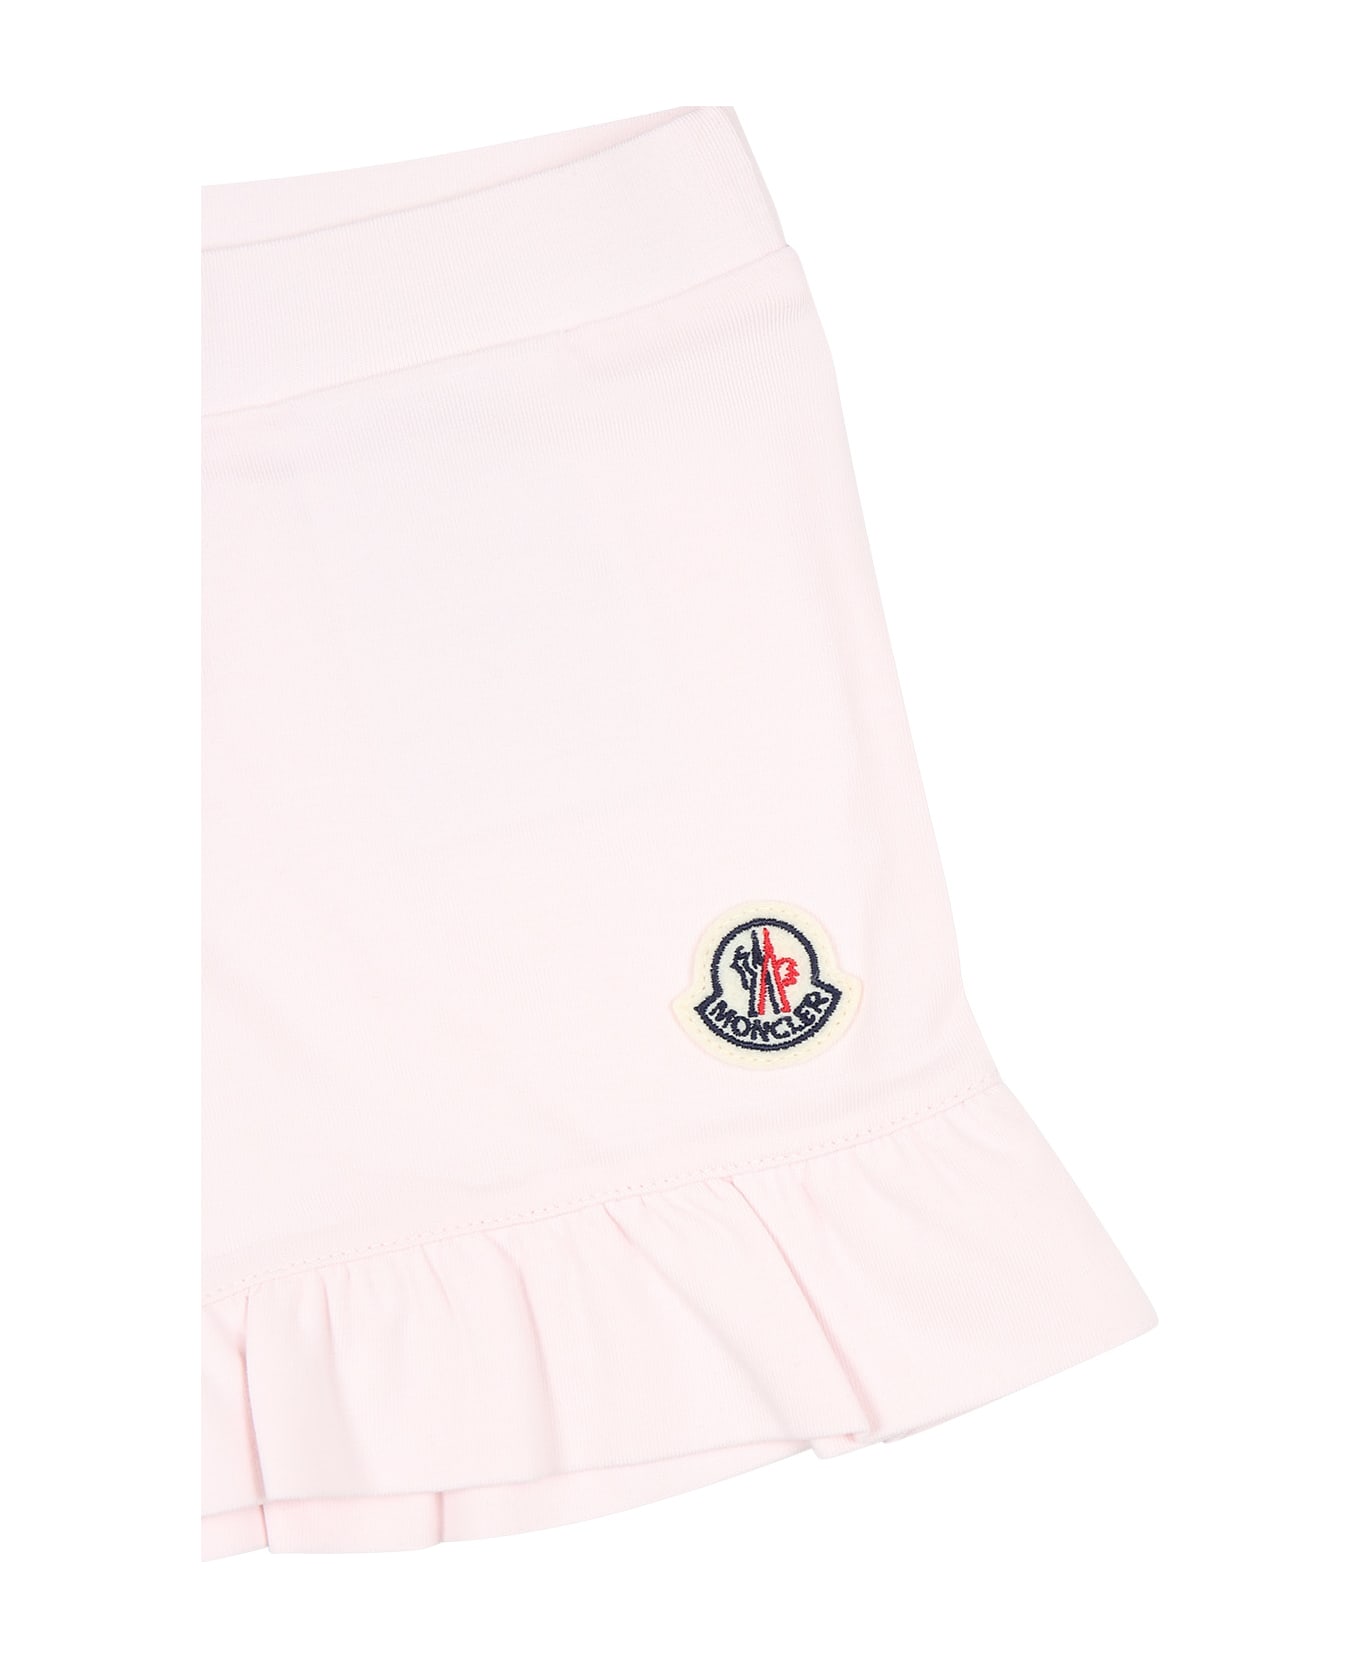 Moncler Pink Sports Suit For Baby Girl With Logo - Pink